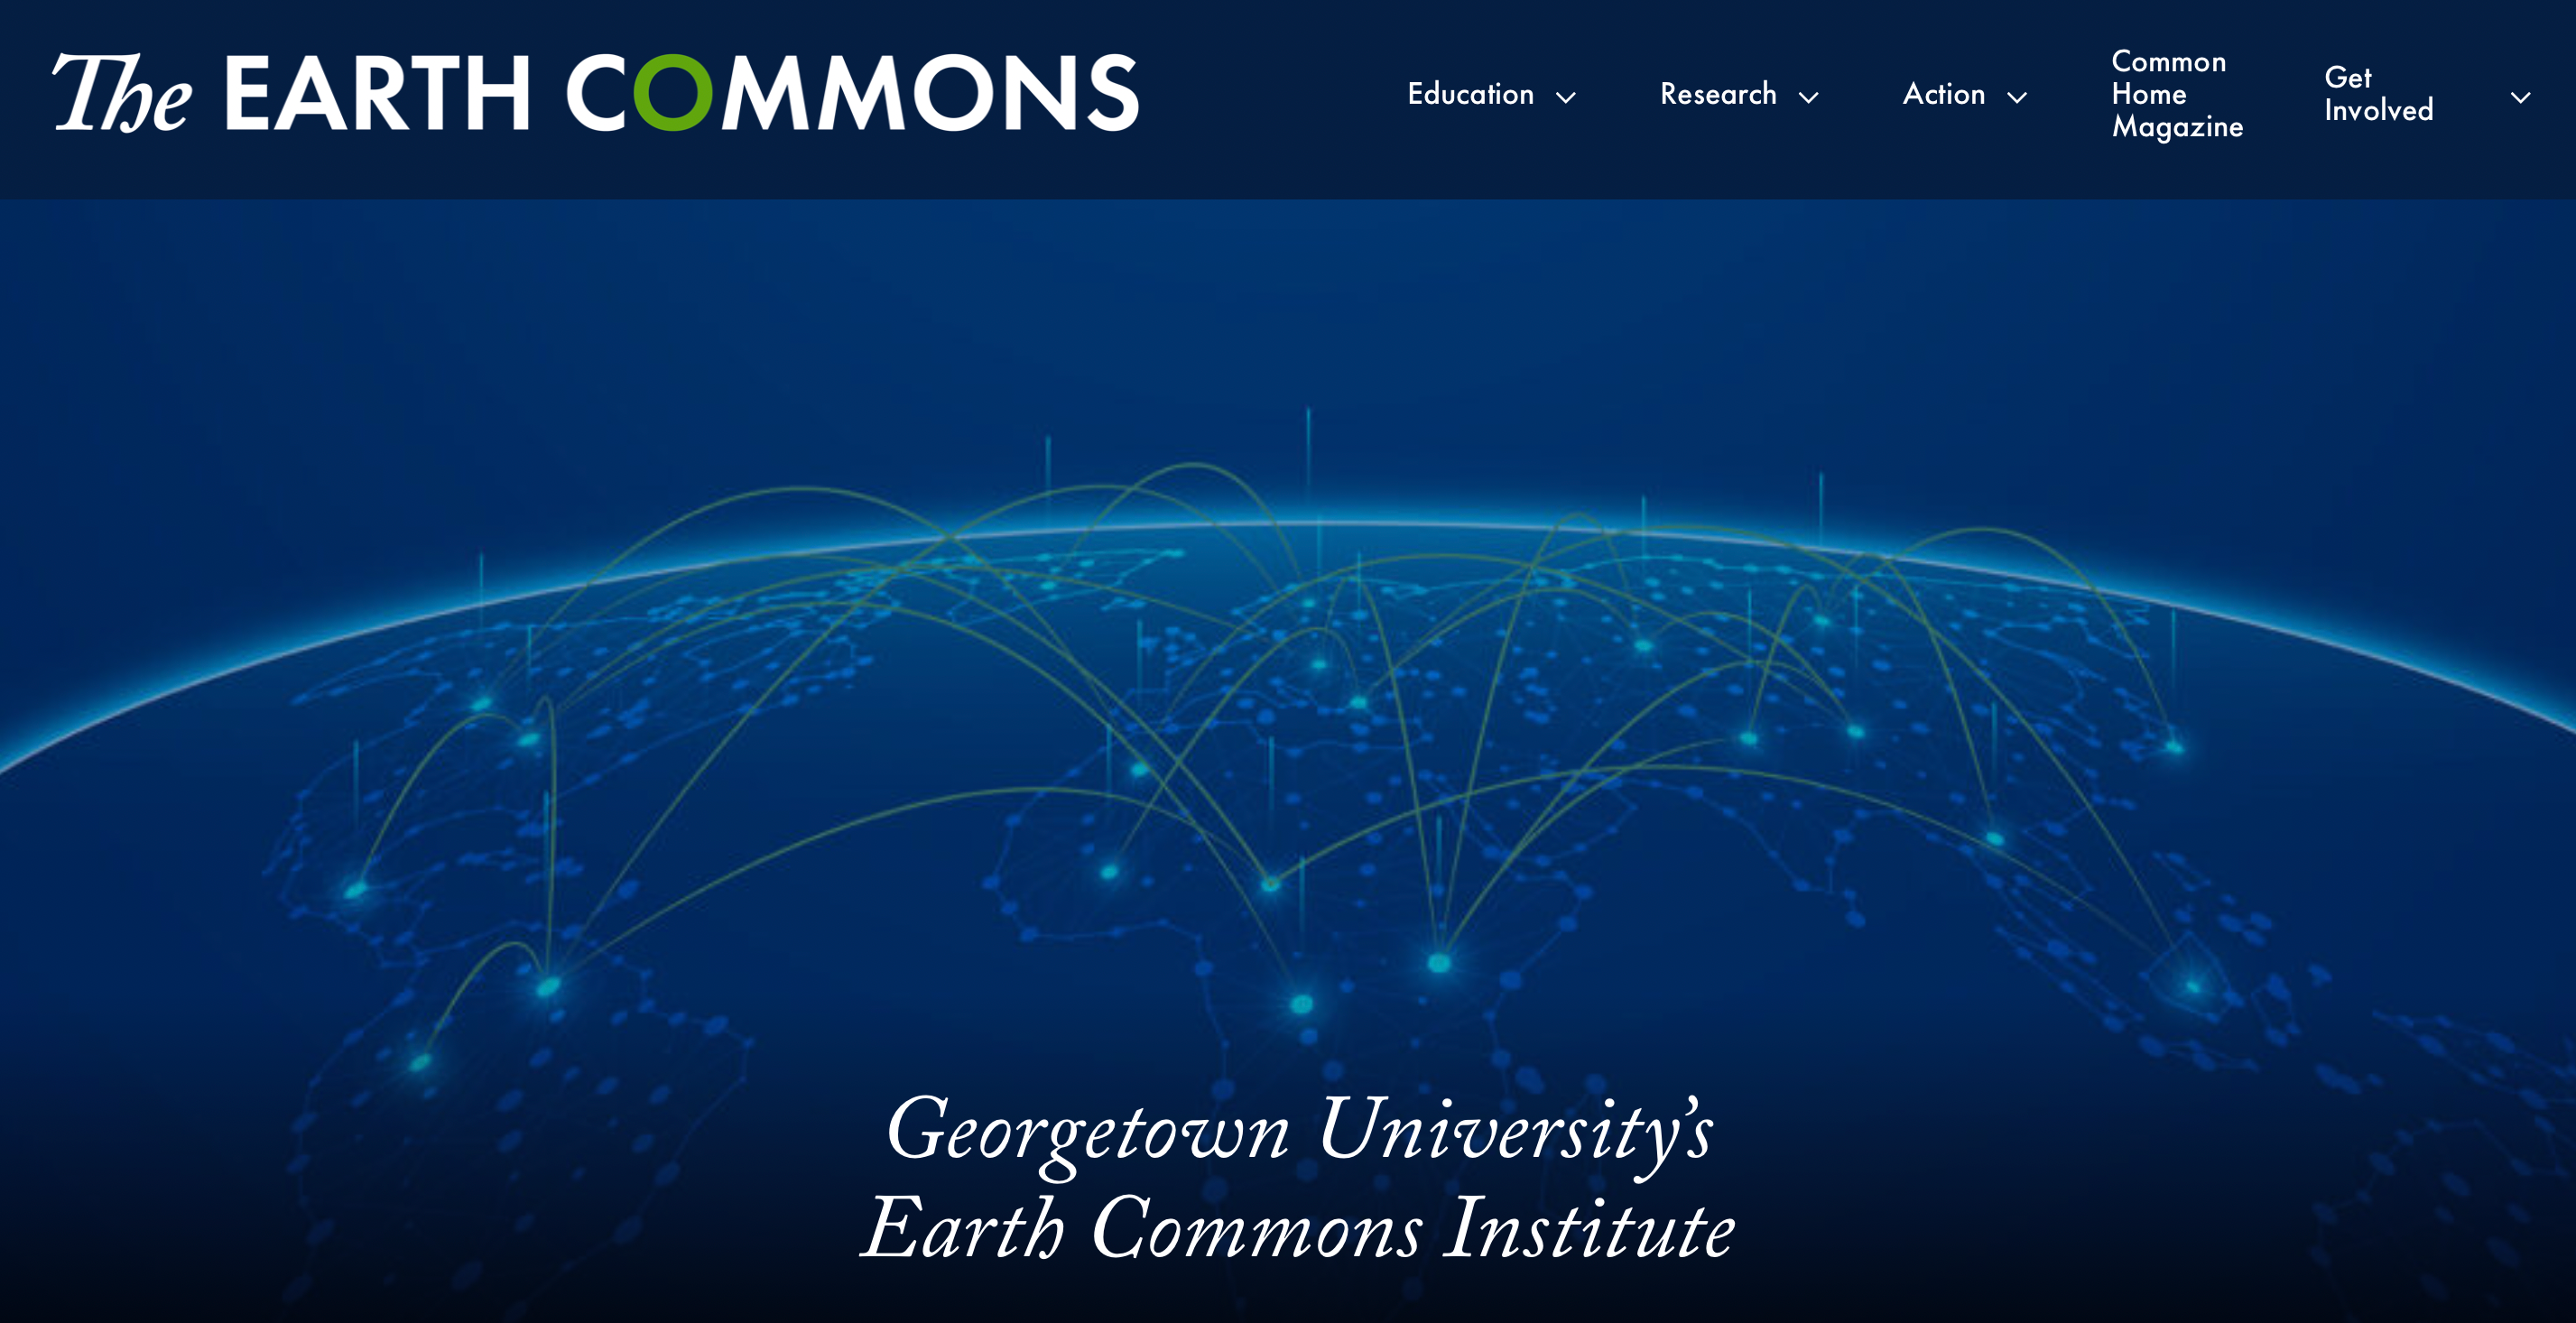 Earth Commons website homepage with interconnected points on a globe